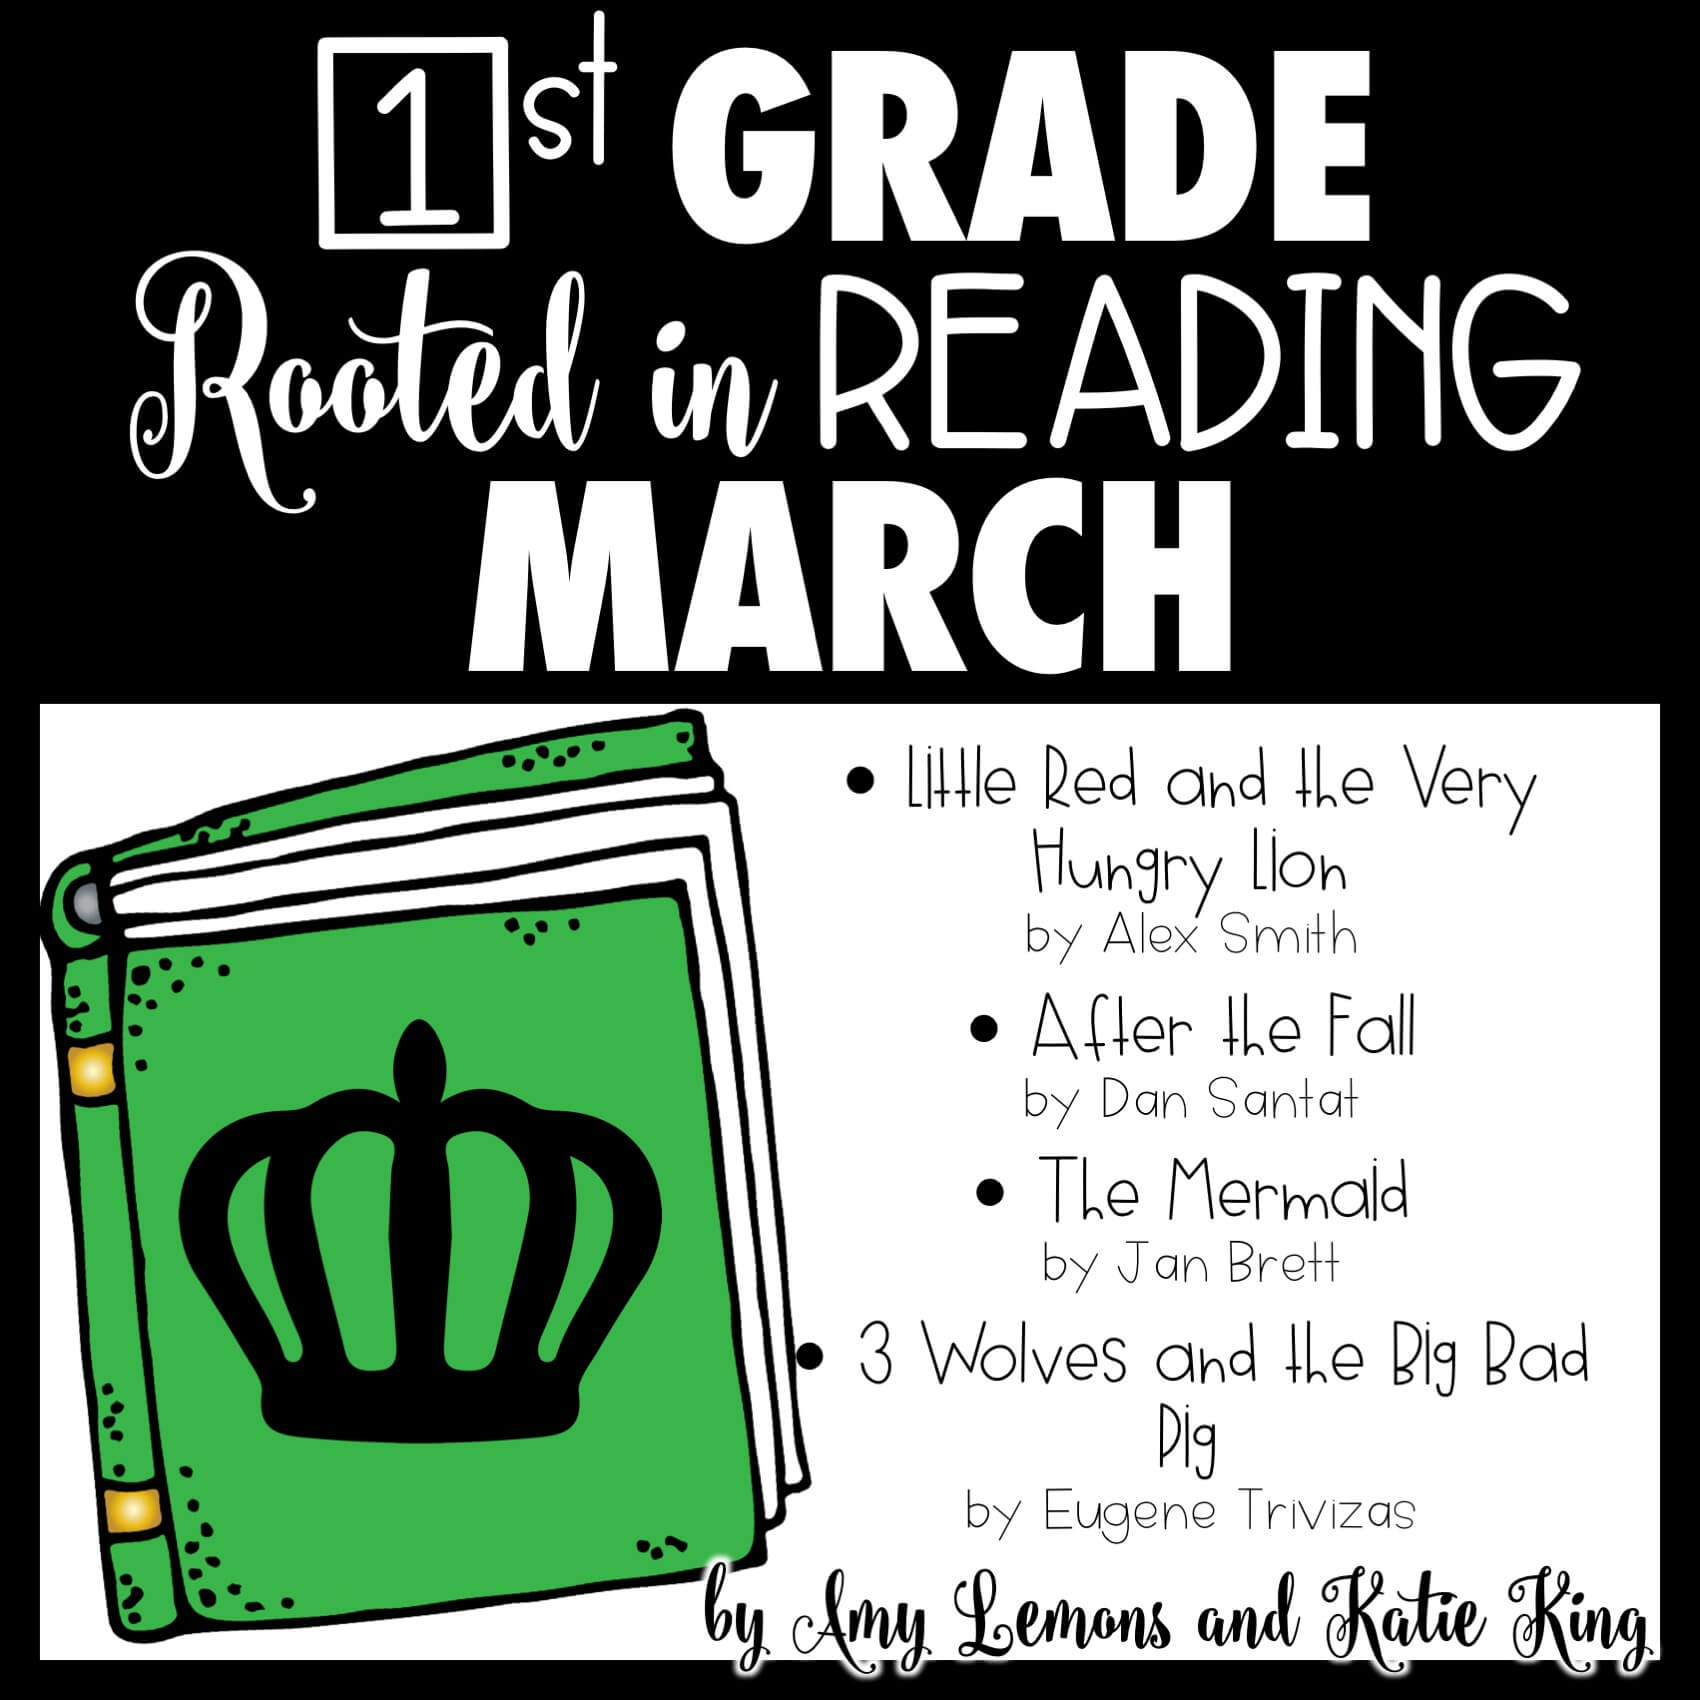 1st Grade Rooted in Reading March